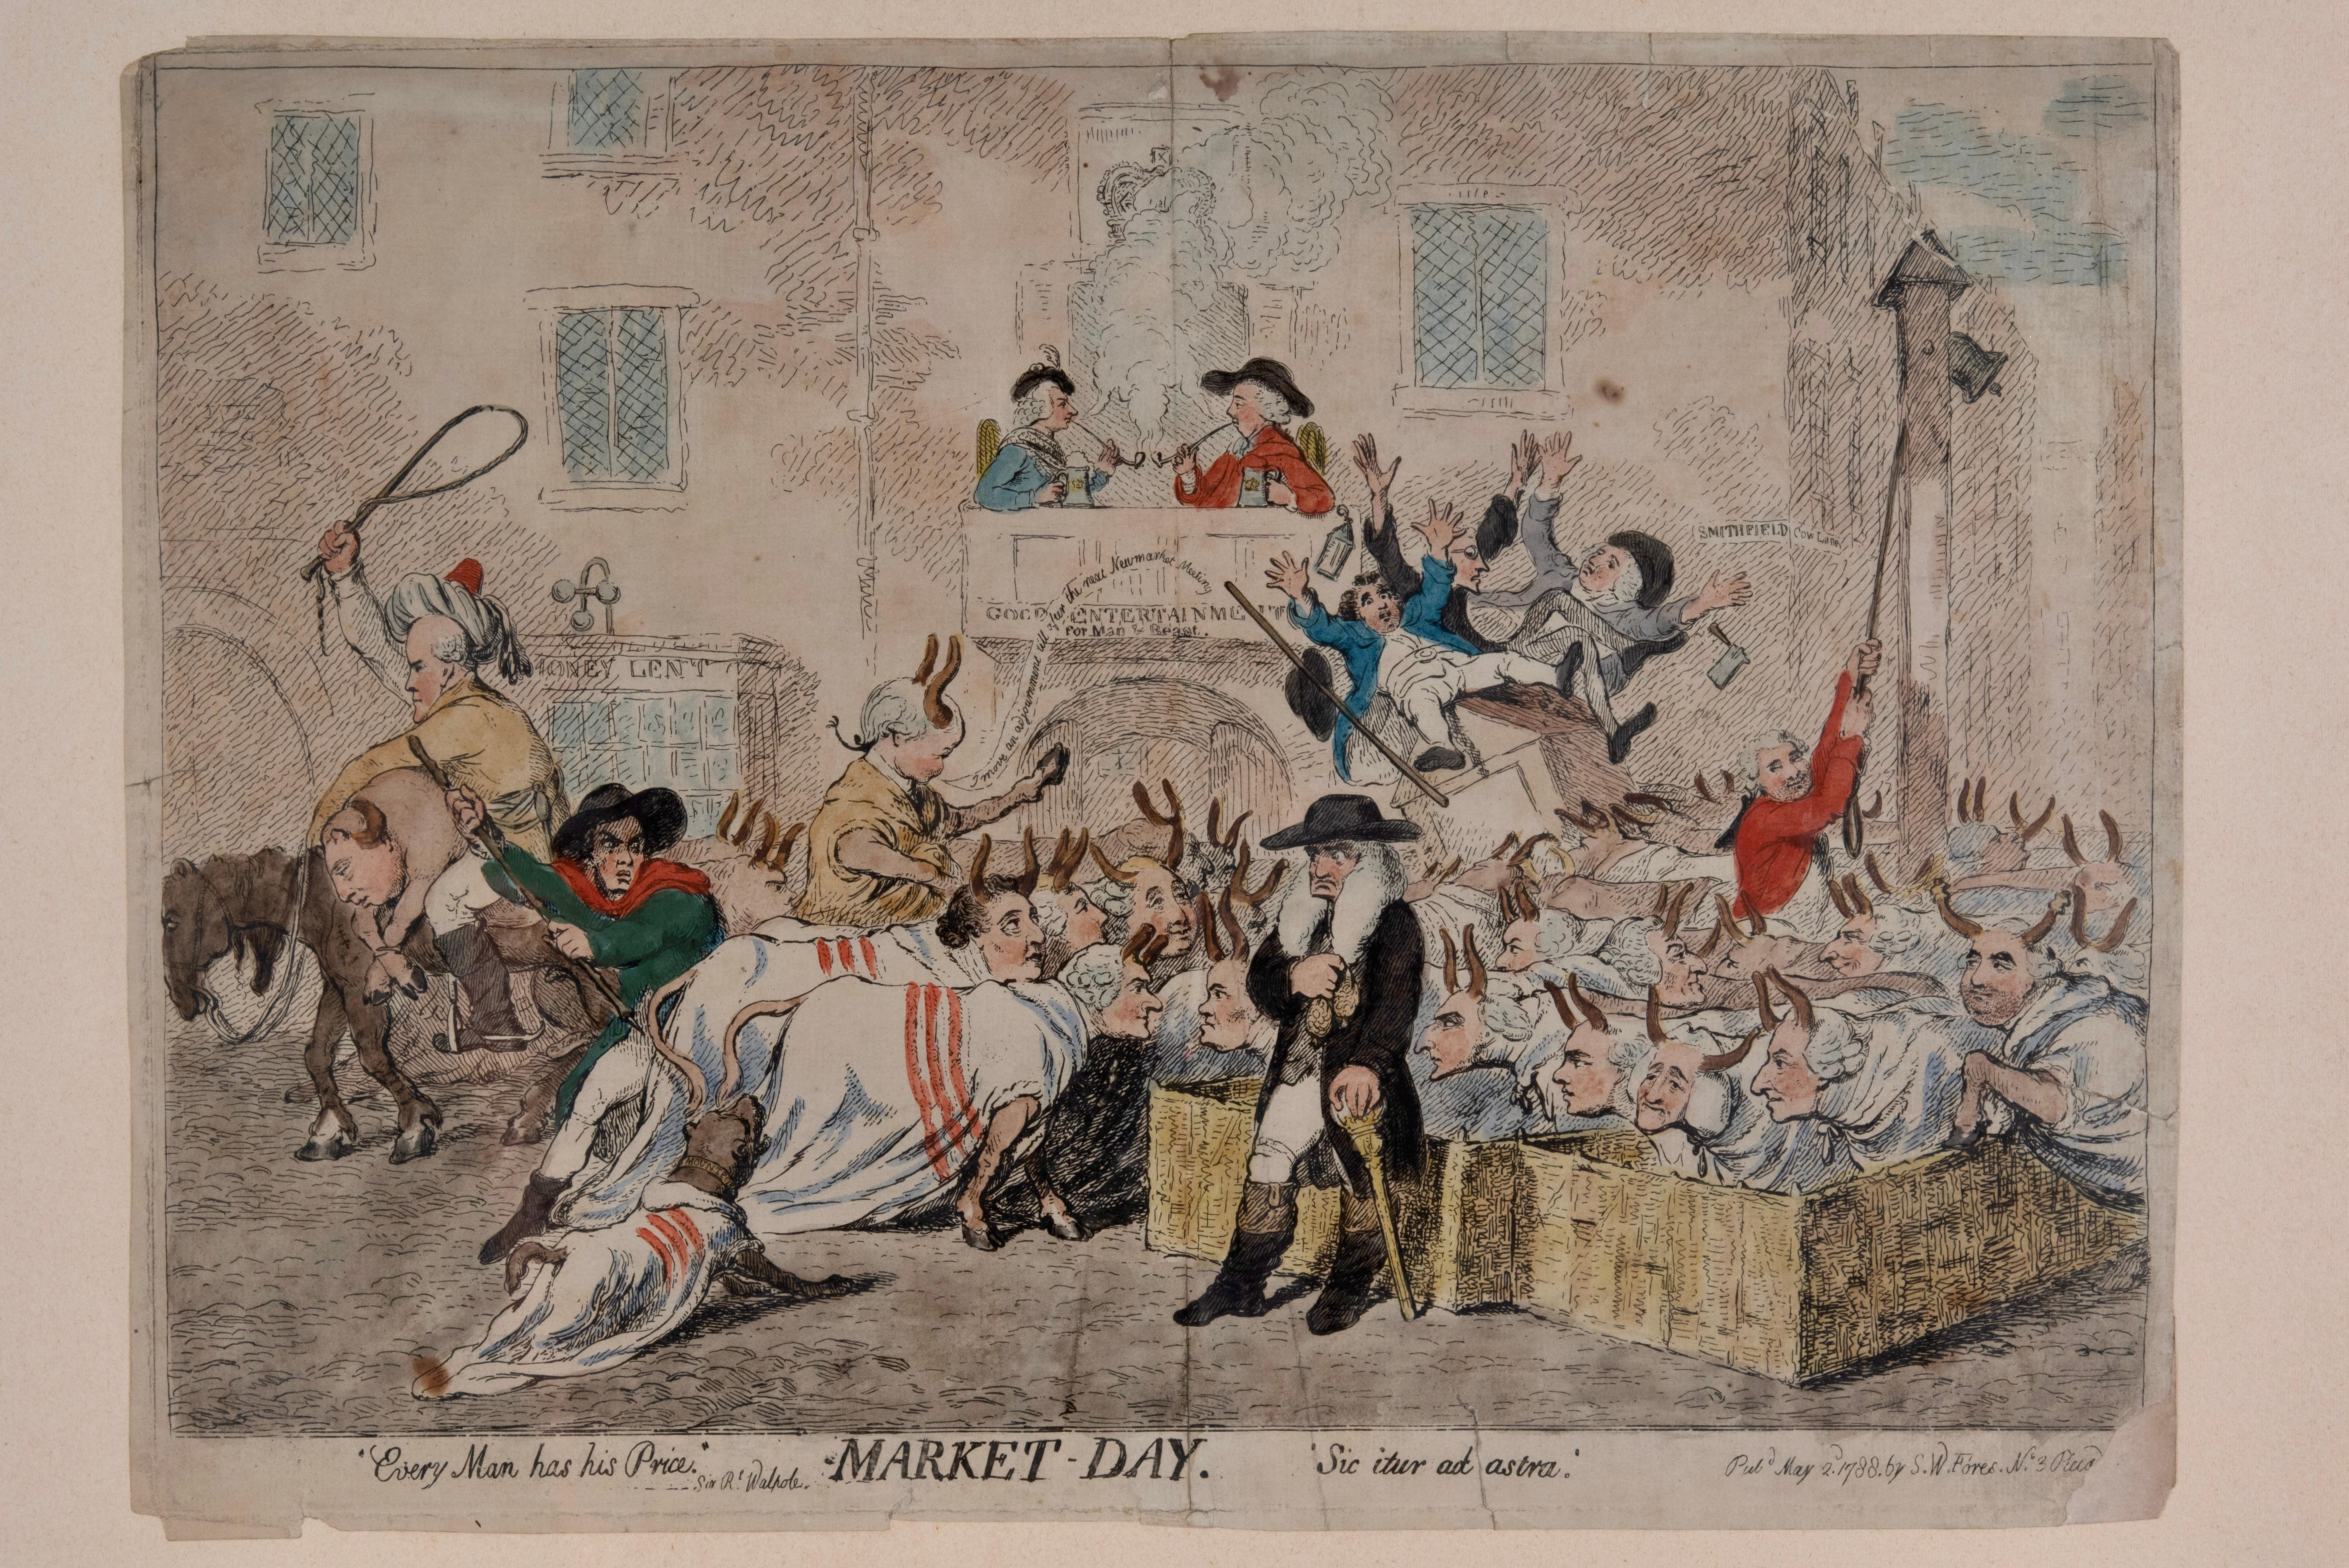 Samuel William Fores 1761 - 1838
Hand-coloured satirical etching
In 1783, Samuel Fores founded a business as a printseller. He specialised in hand-coloured, singly issued satirical prints or caricatures, and became one of London's leading